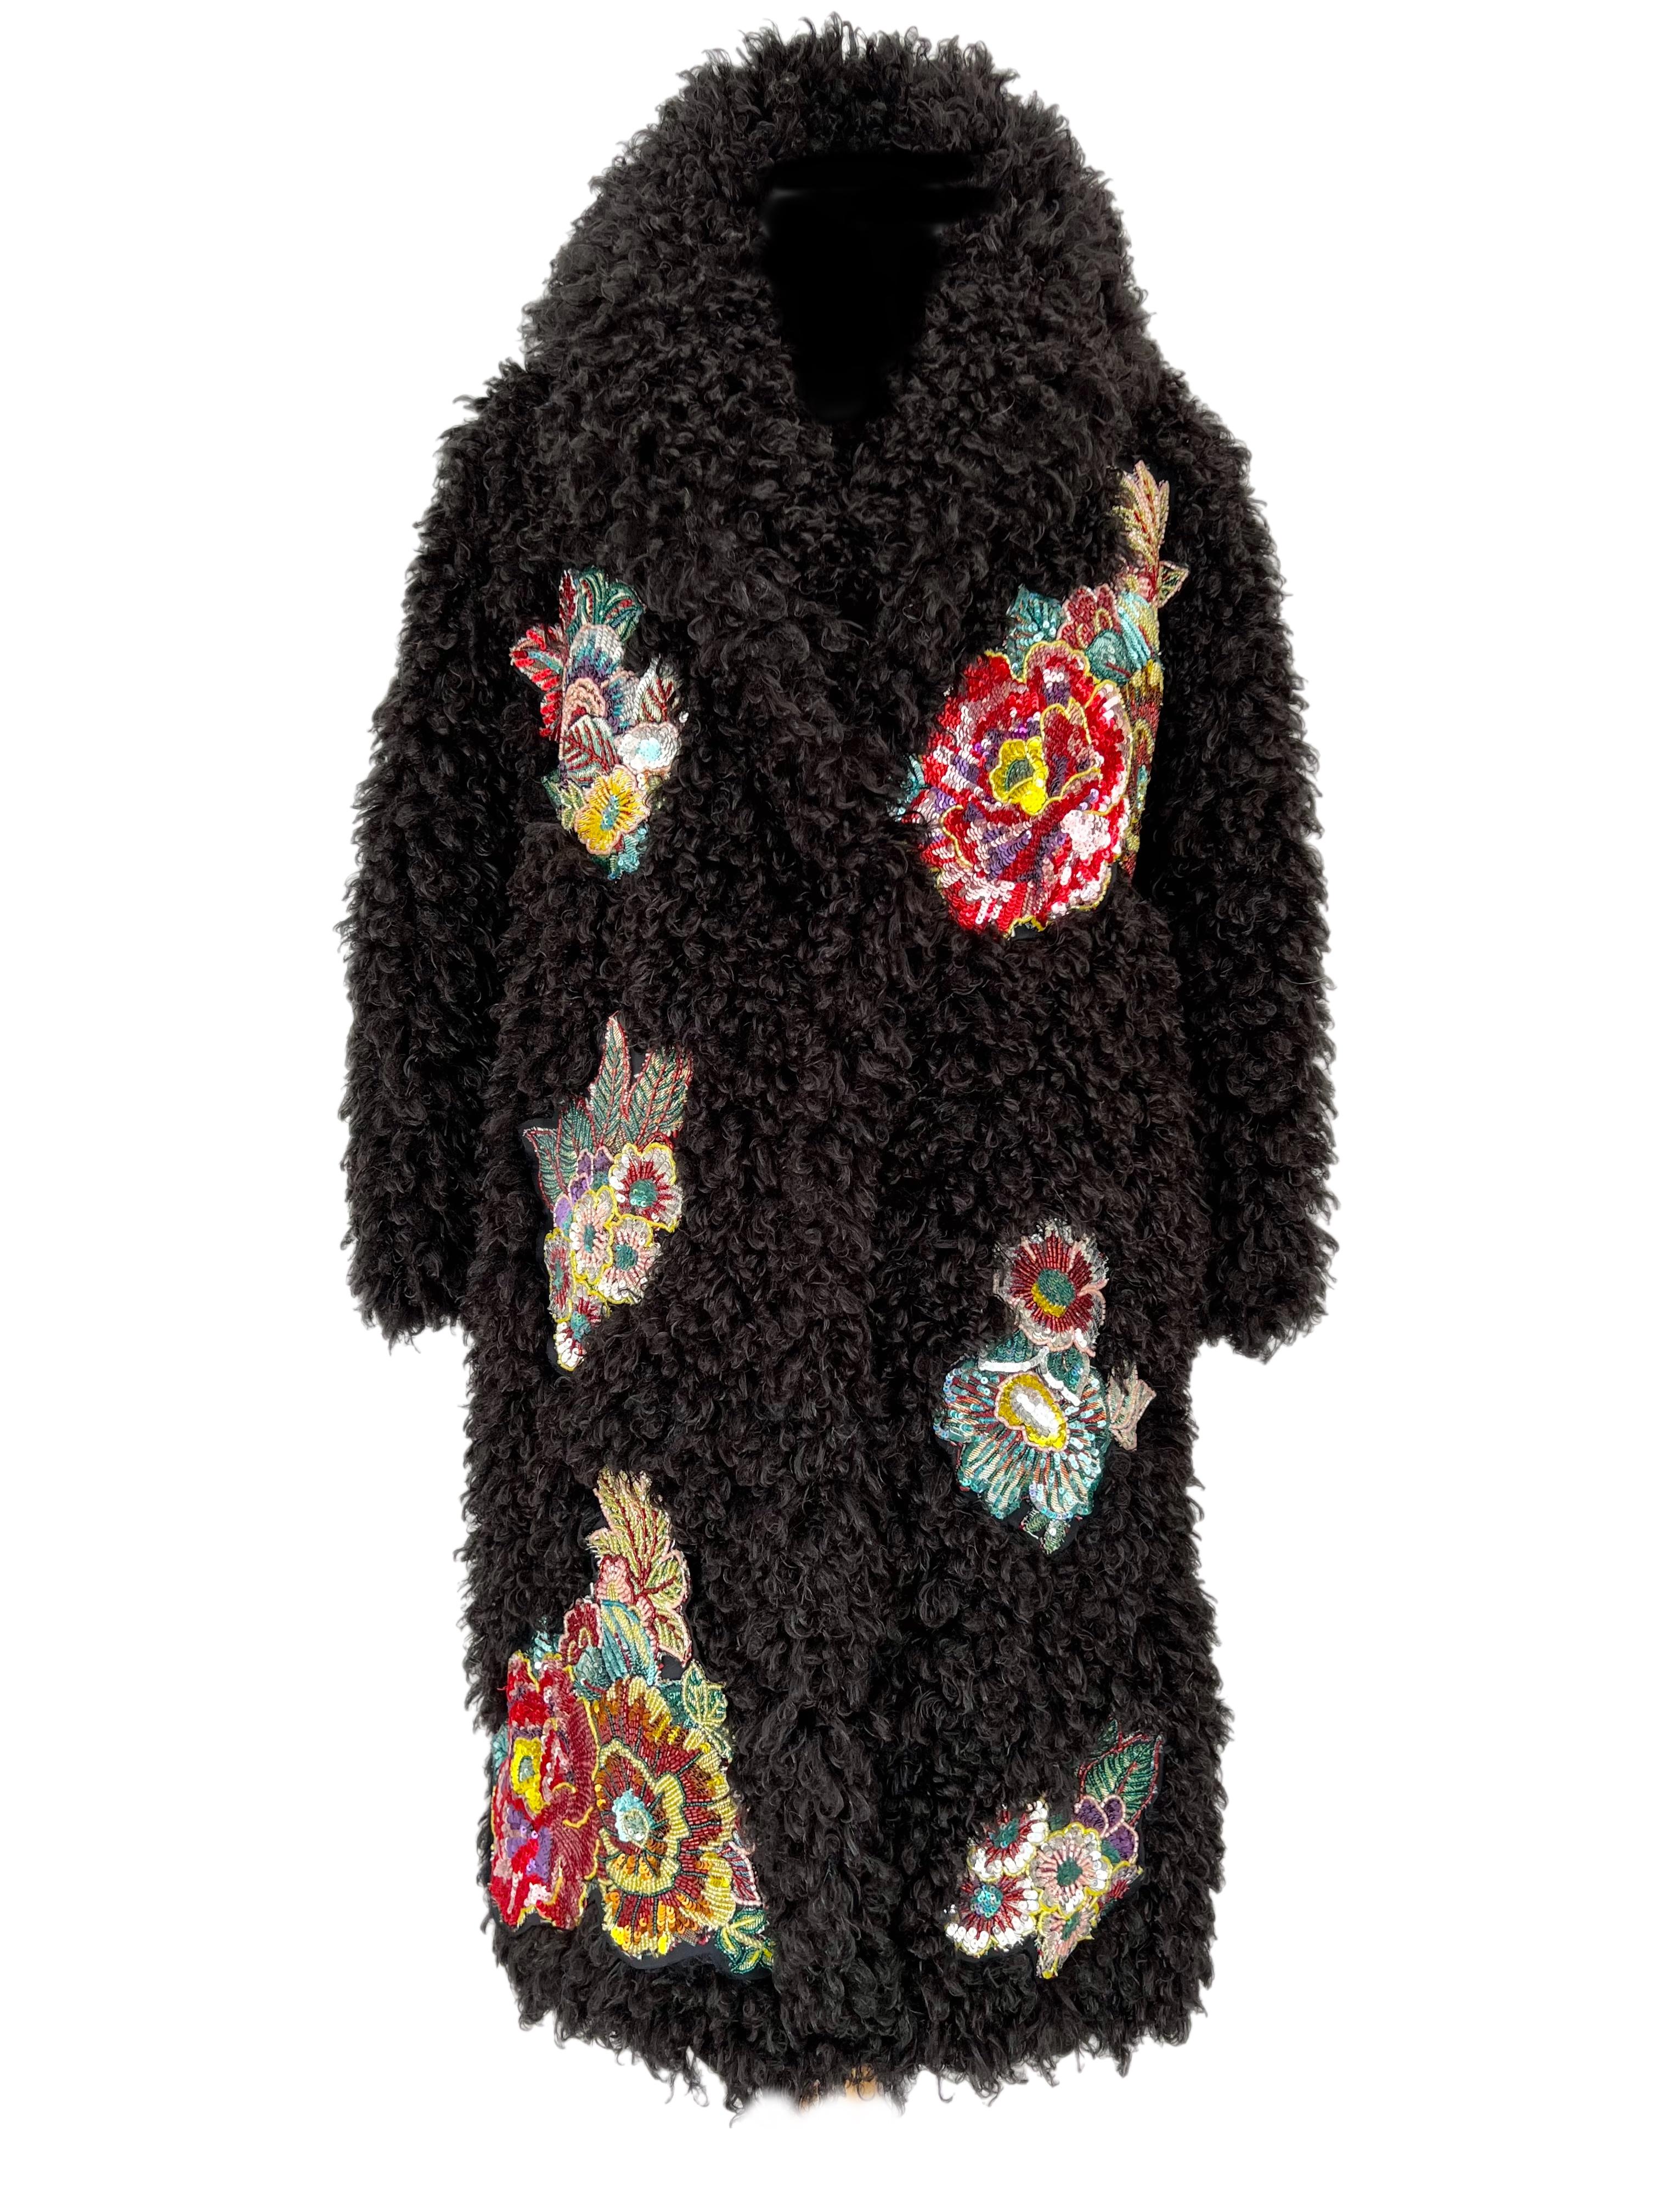 Pelush Black Boucle' Faux Fur Coat With Revere' Collar And Embroidery Patches -S In New Condition For Sale In Greenwich, CT